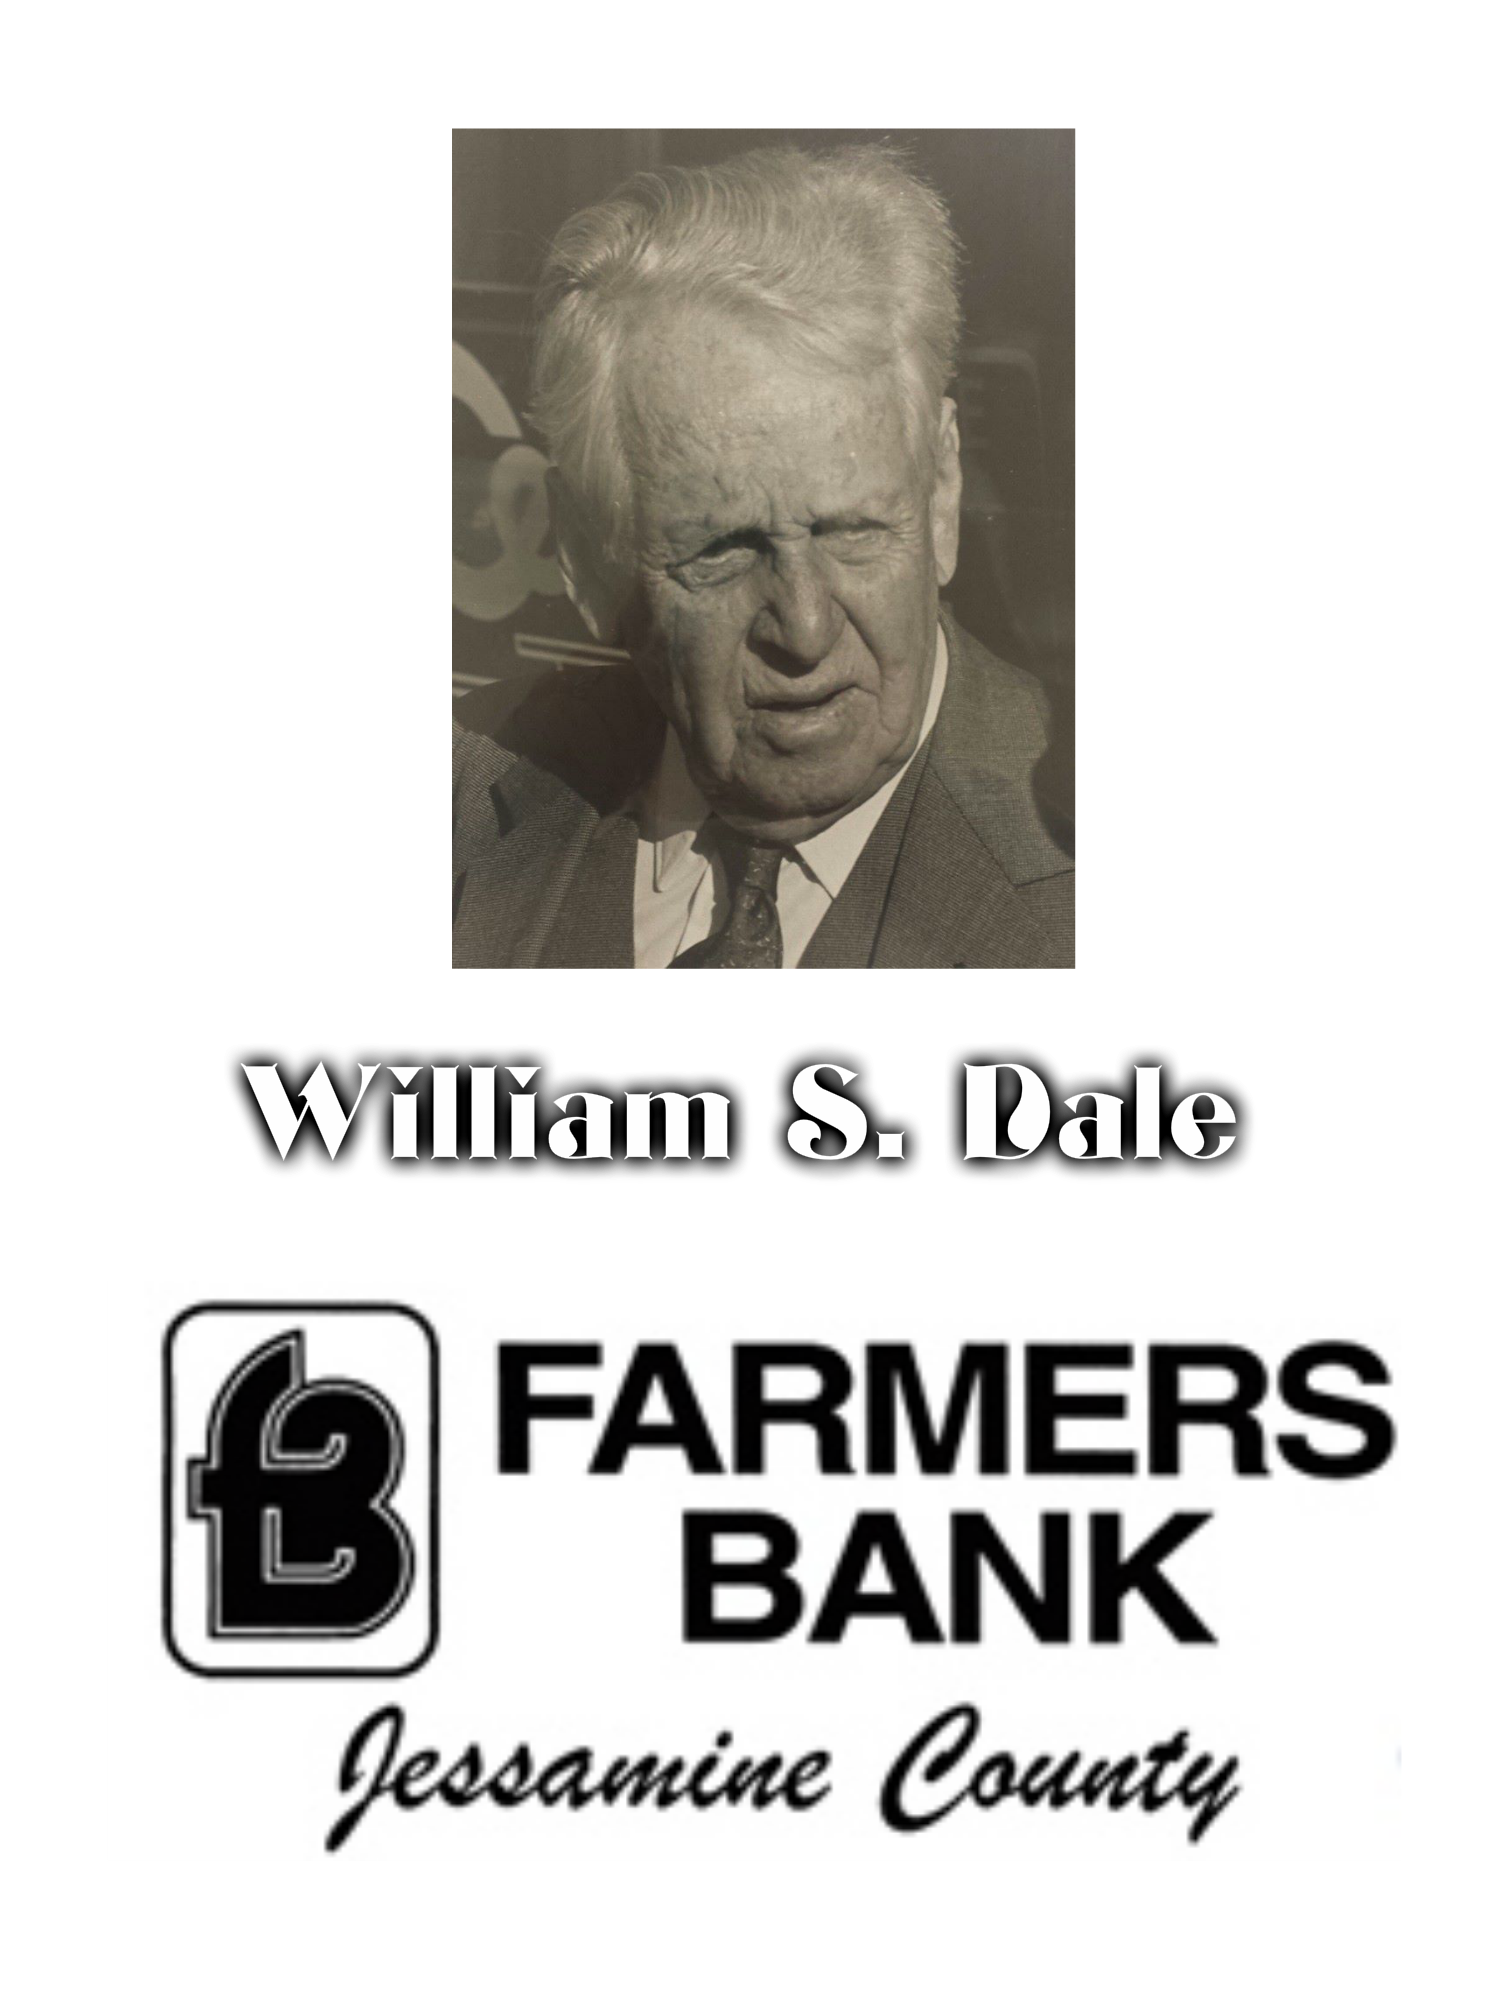 The Farmer’s Bank of Jessamine County & William S. Dale (with son, Landy Dale) - 4/2/16 - # 68